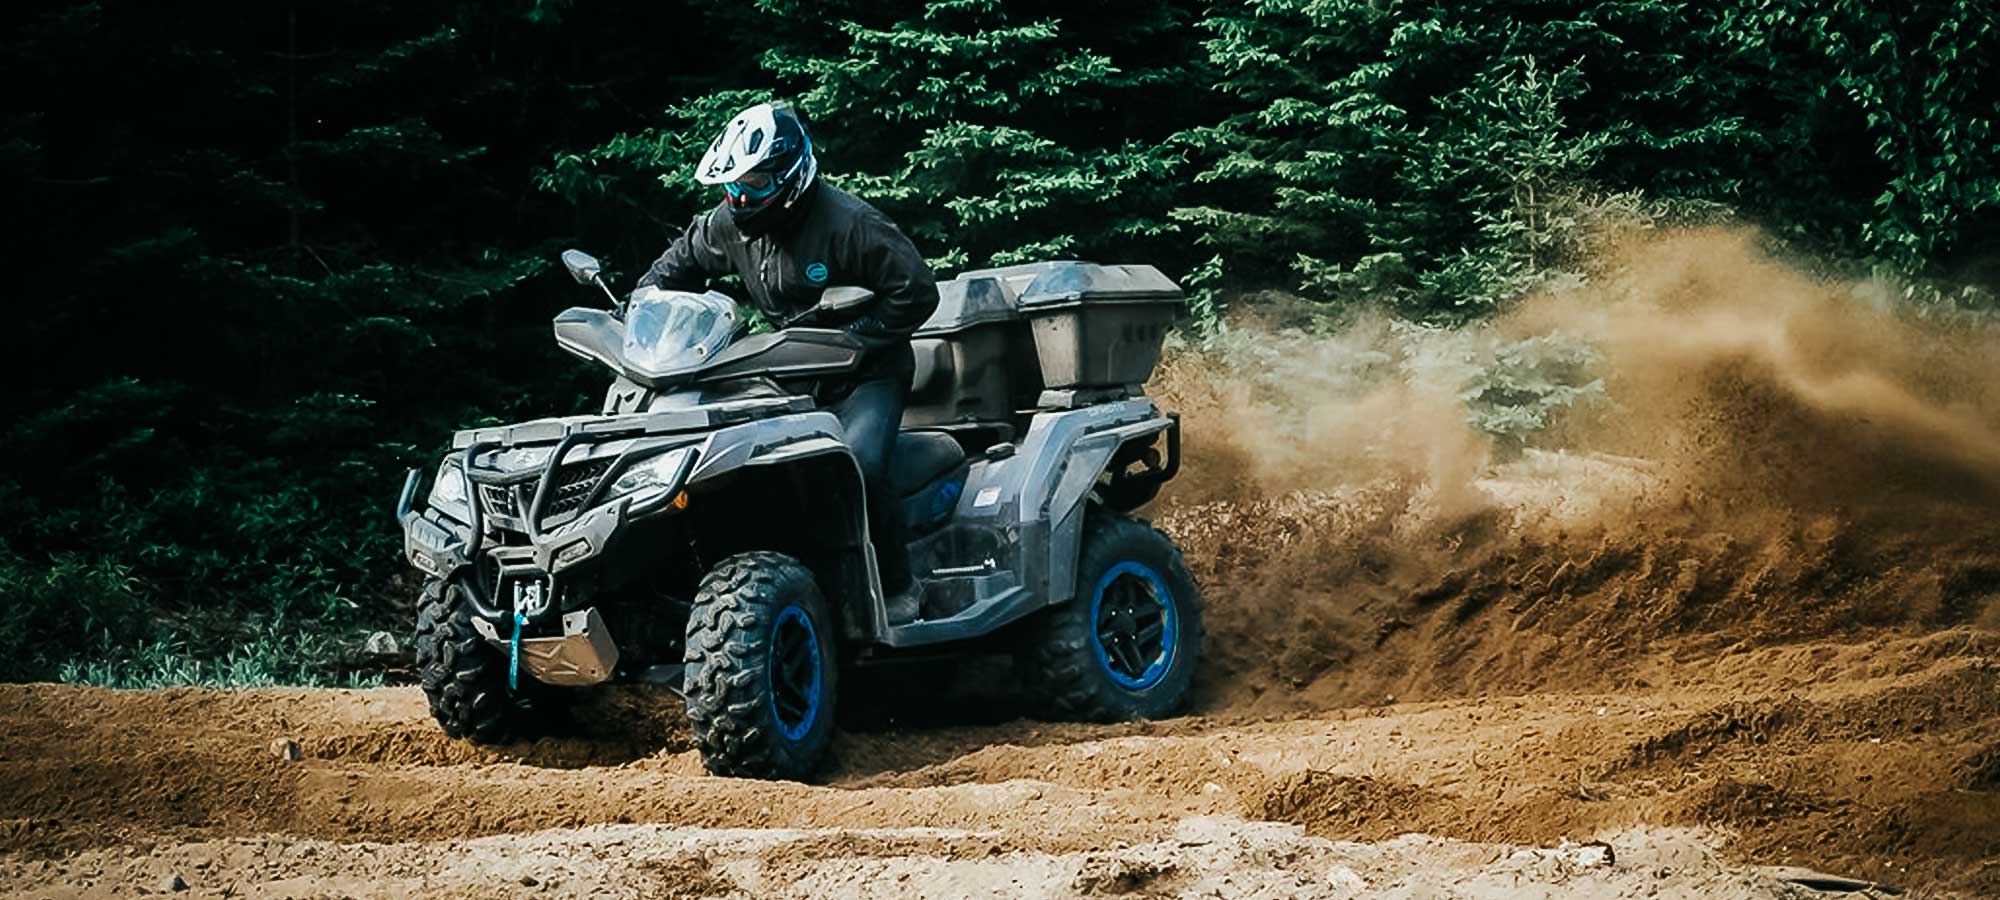 Banner ATV Can-am  Bombardier  1